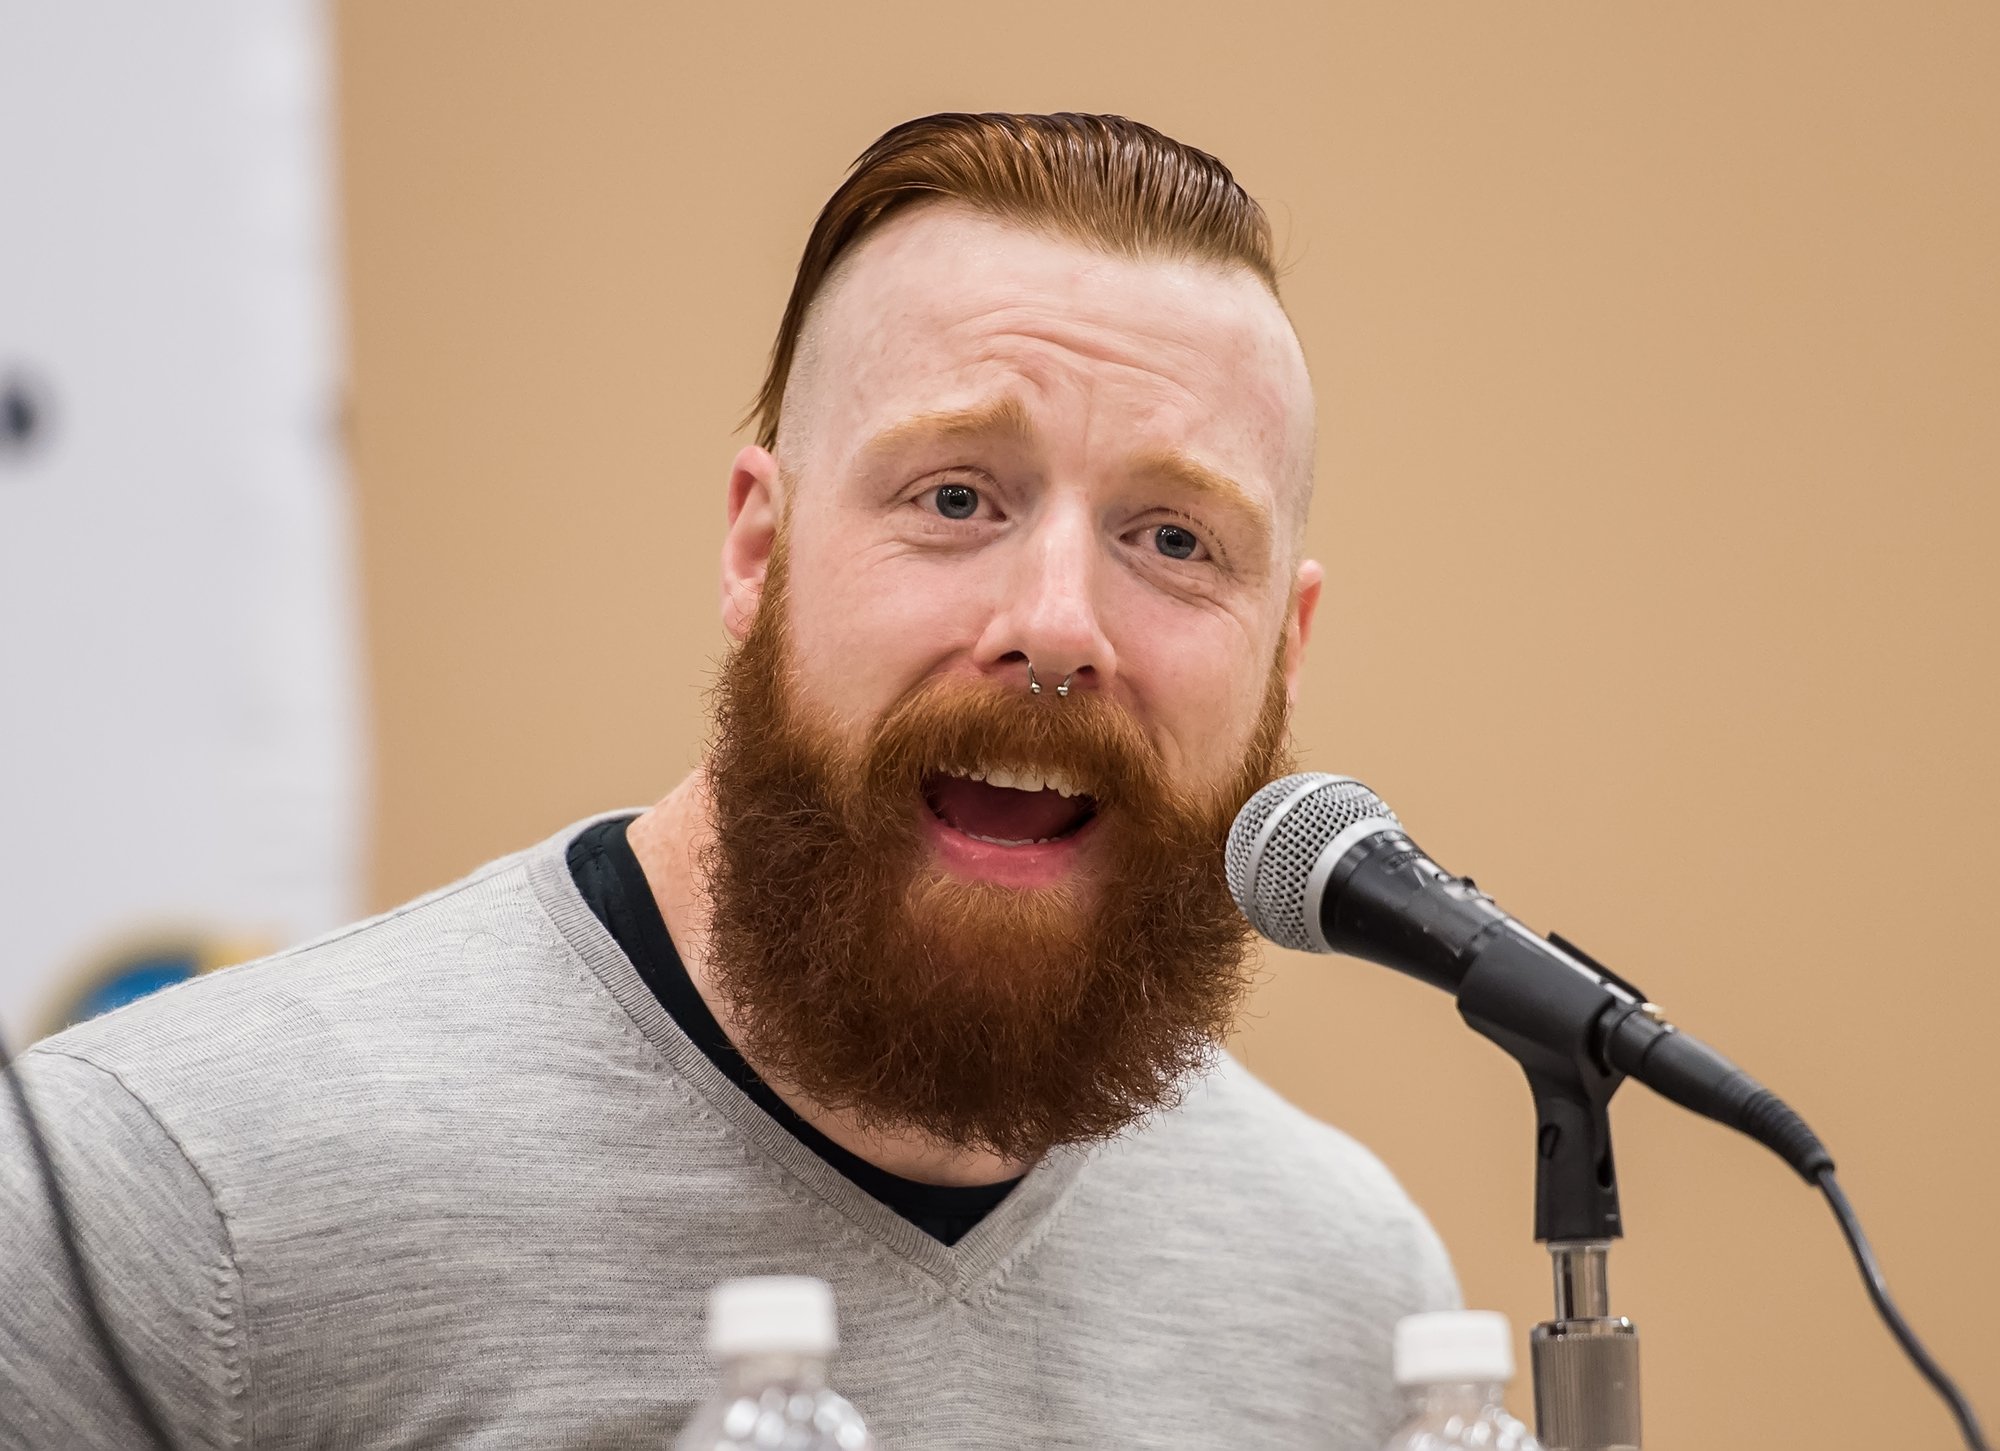 Sheamus Plugs Upcoming Workout With Daniel Bryan, JR Shares Jim Cornette’s Hilarious Bar Fight Story (Video)